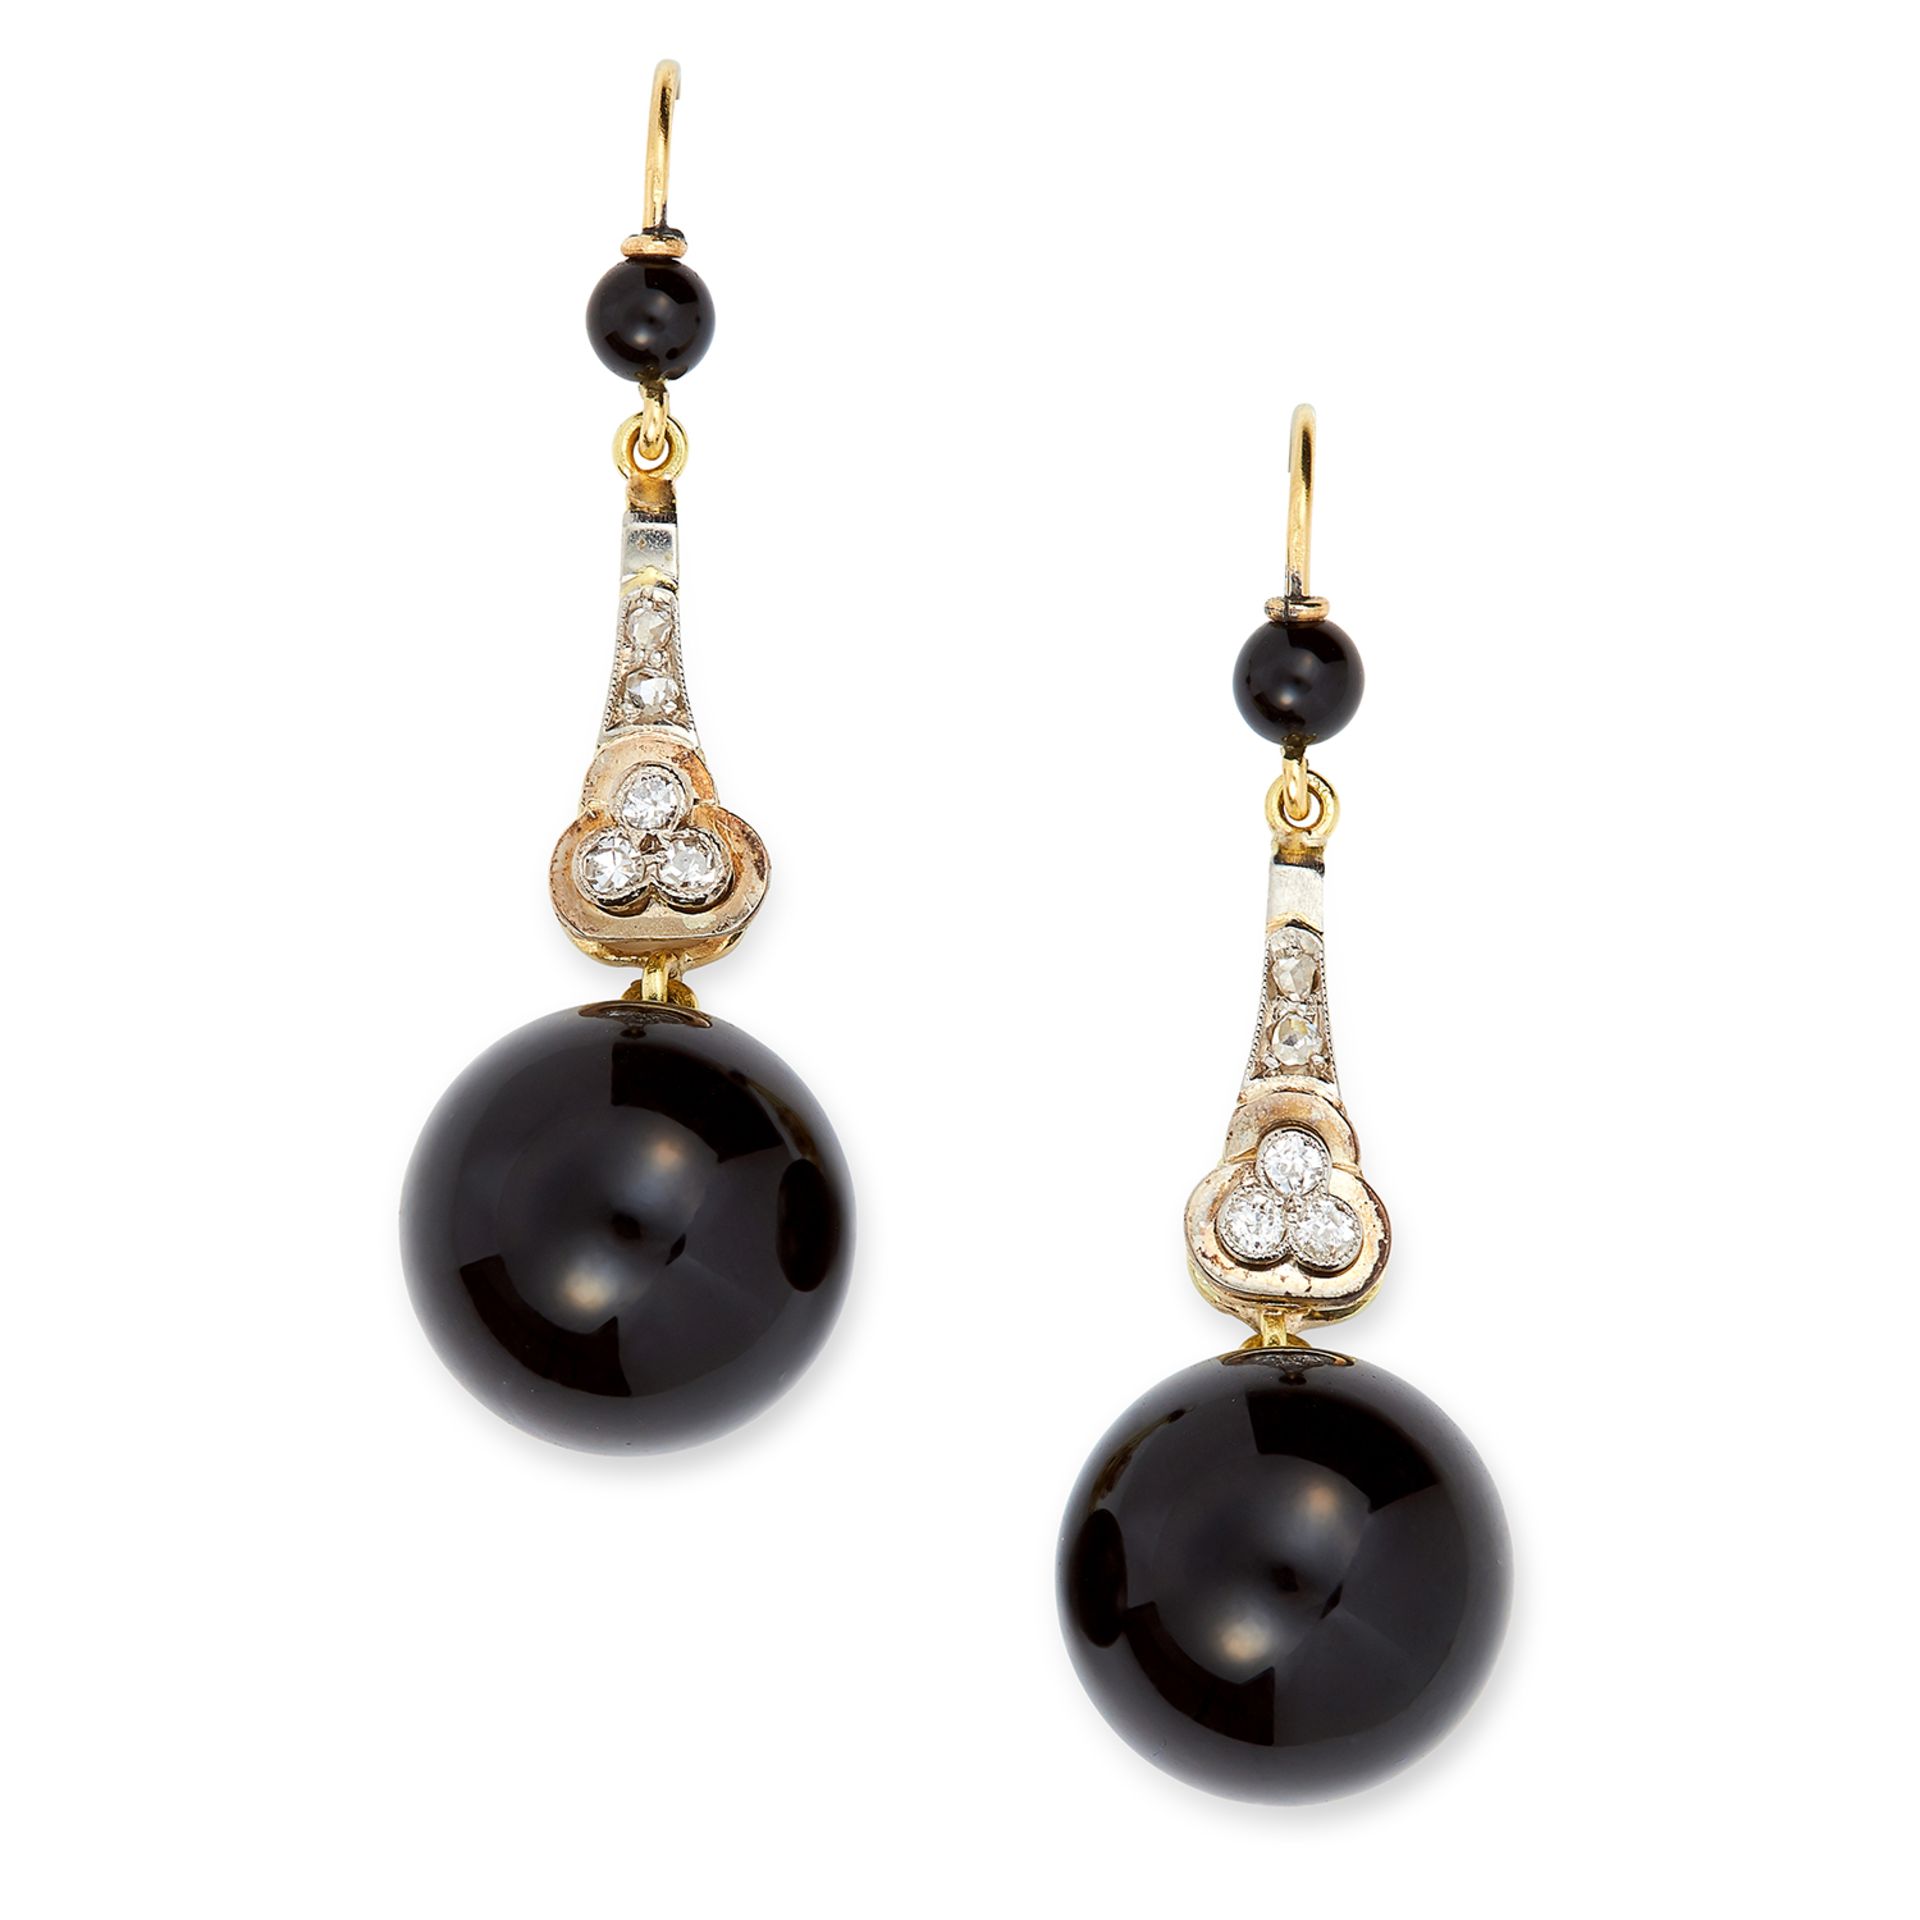 ART DECO ONYX AND DIAMOND EARRINGS set with rose and old cut diamonds, suspending onyx beads, 4.7cm,